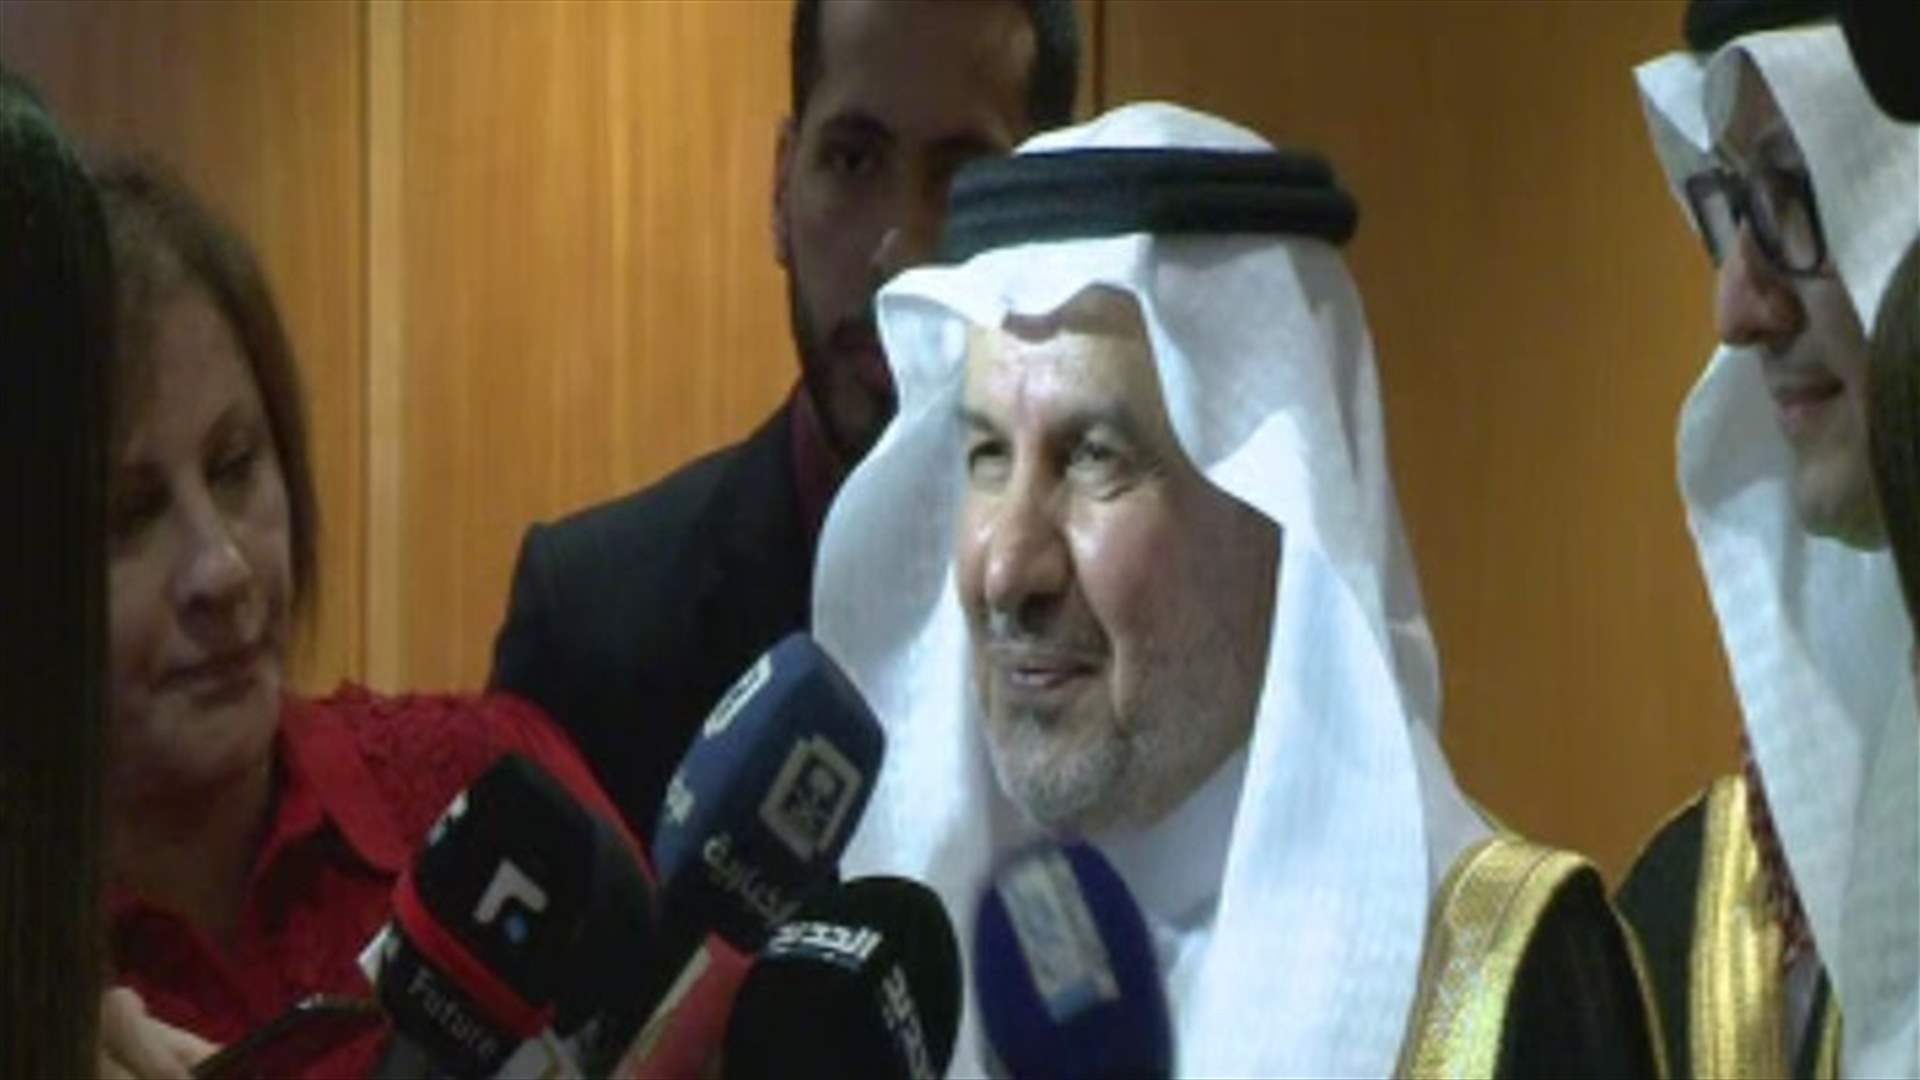 Saudi Royal Court Advisor in Lebanon, says several projects helping refugees to be launched